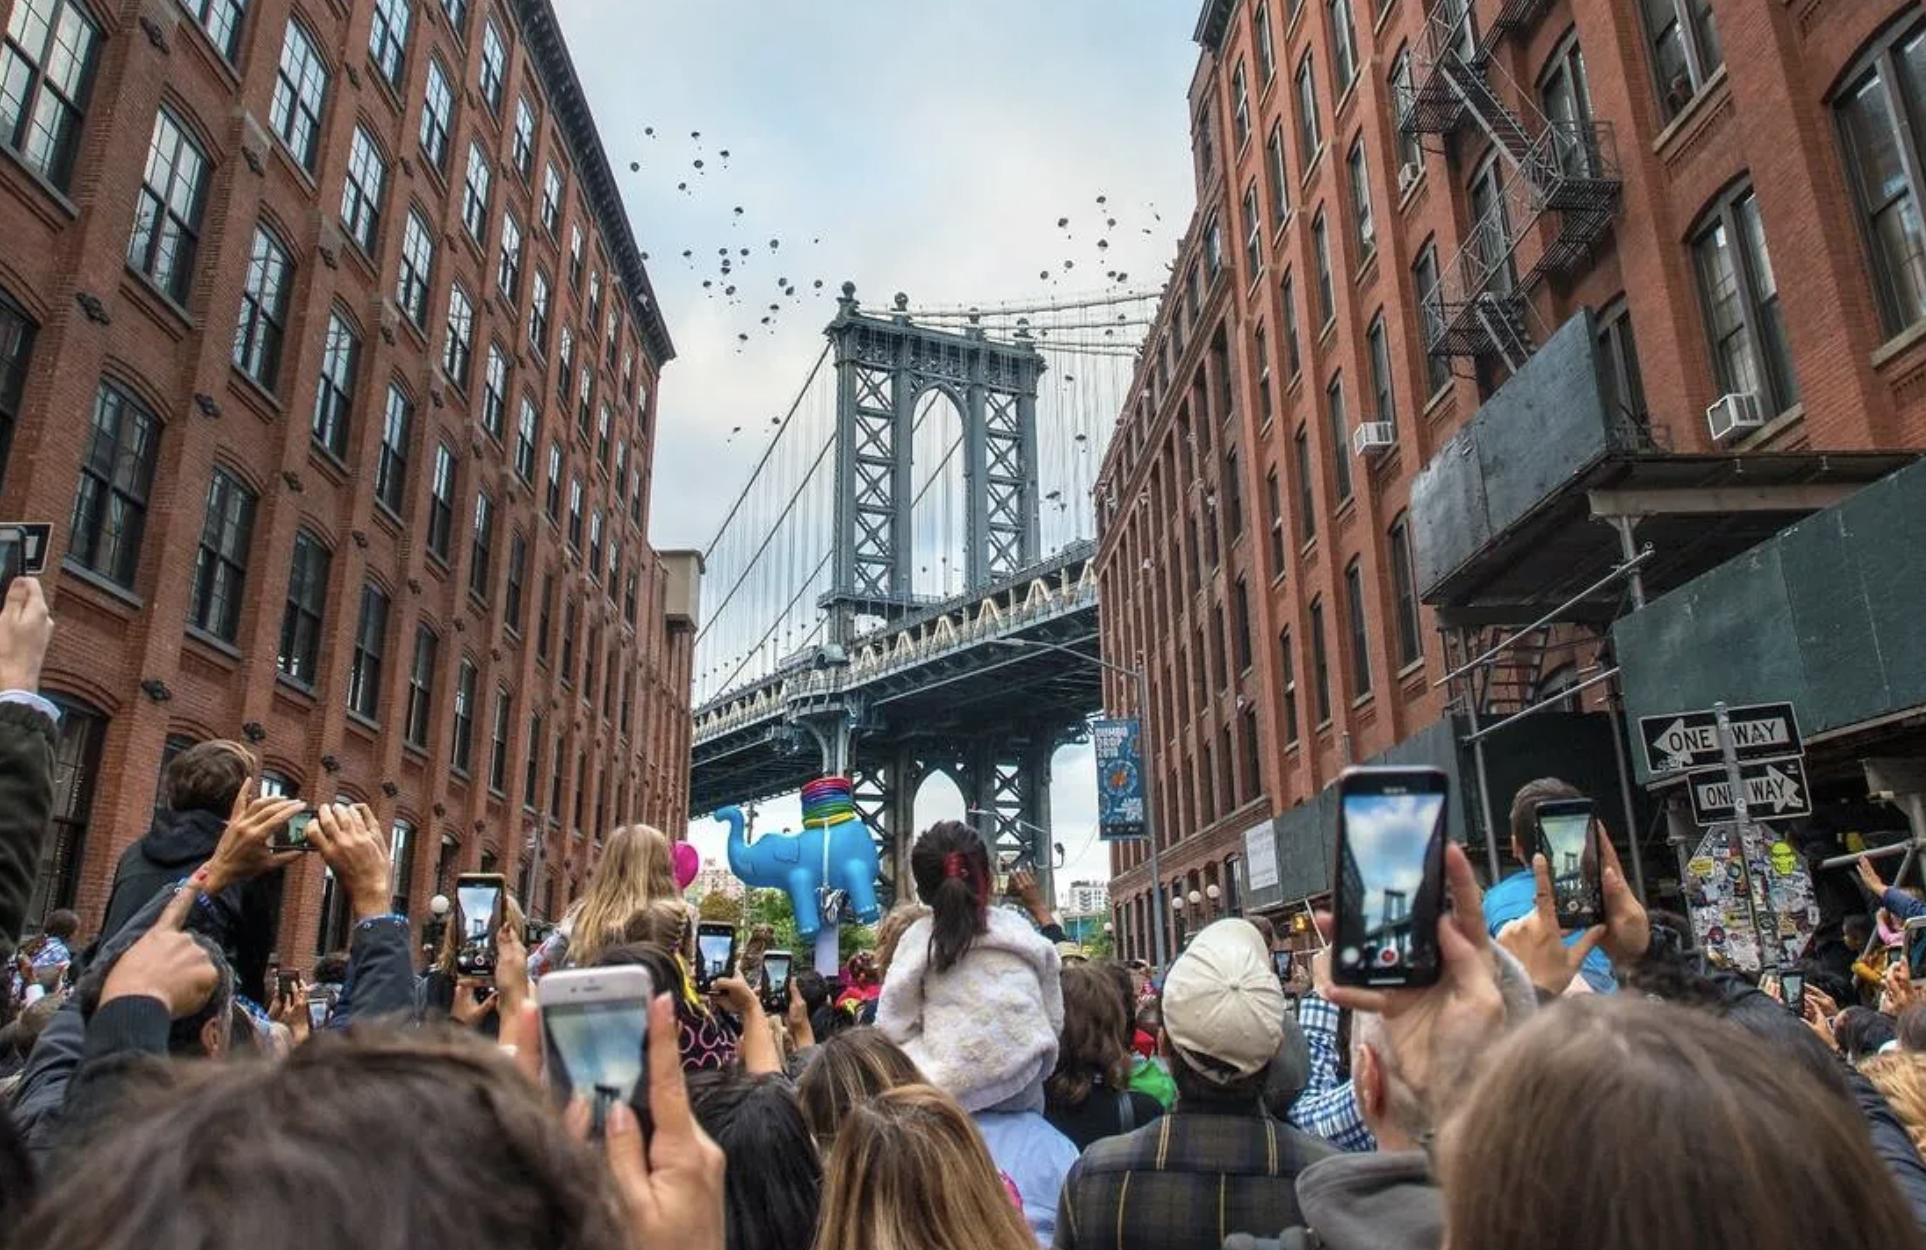 Thousands of tiny elephants will parachute into Dumbo this month